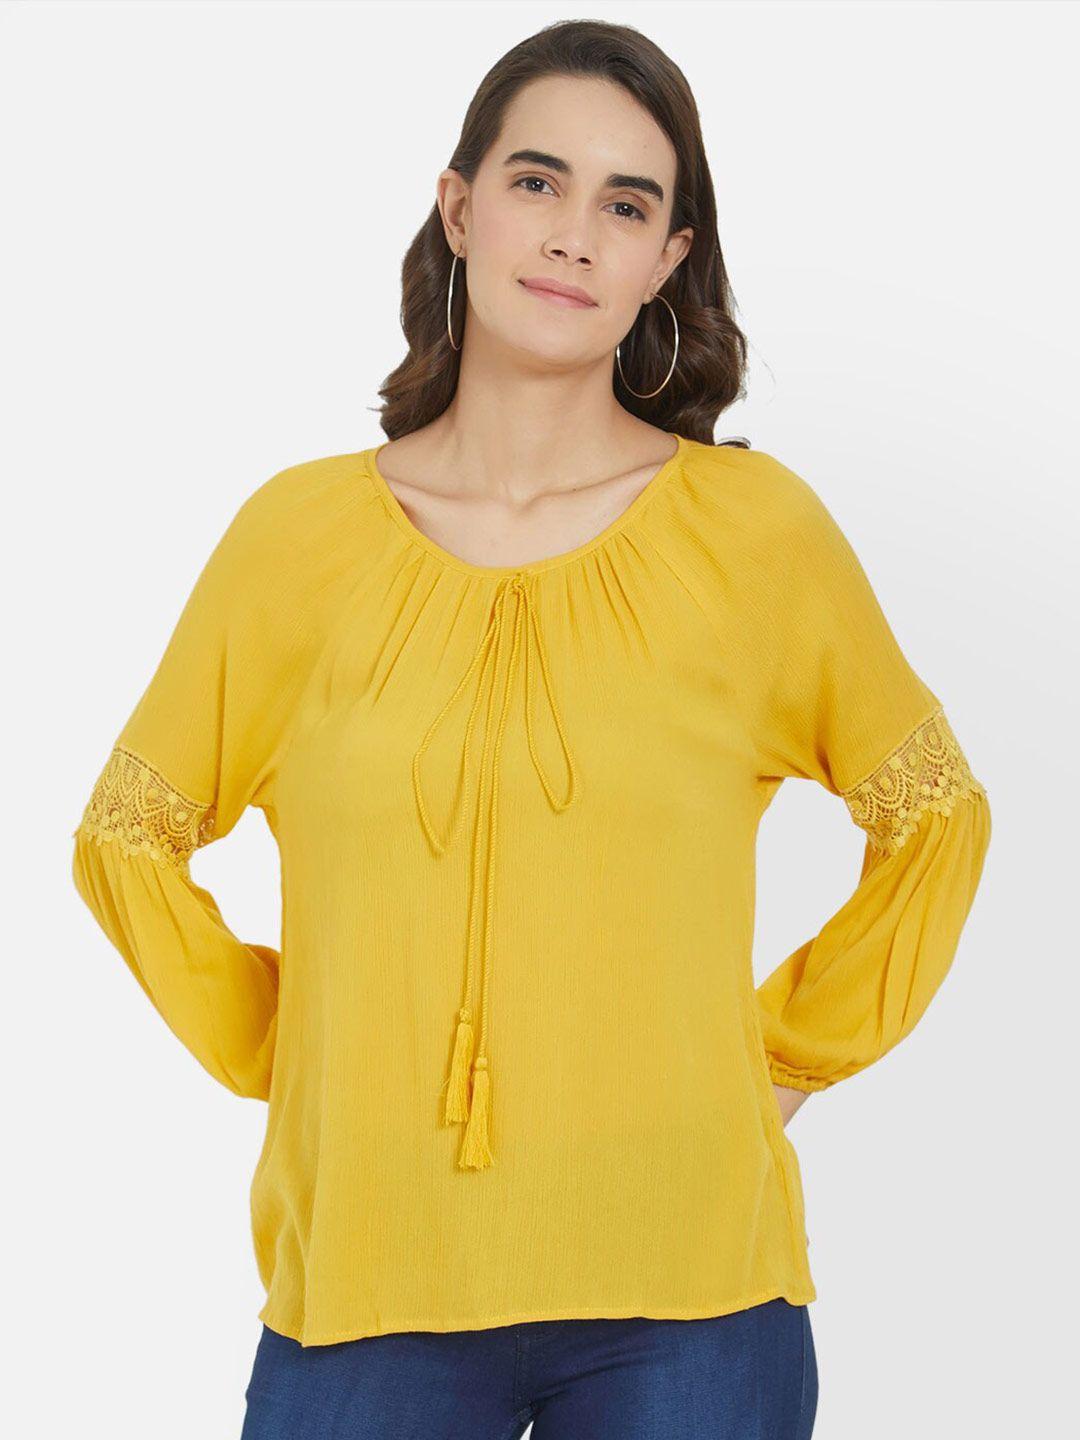 fusion-beats-yellow-solid-tie-up-neck-bishop-sleeves-top-with-lace-inserts